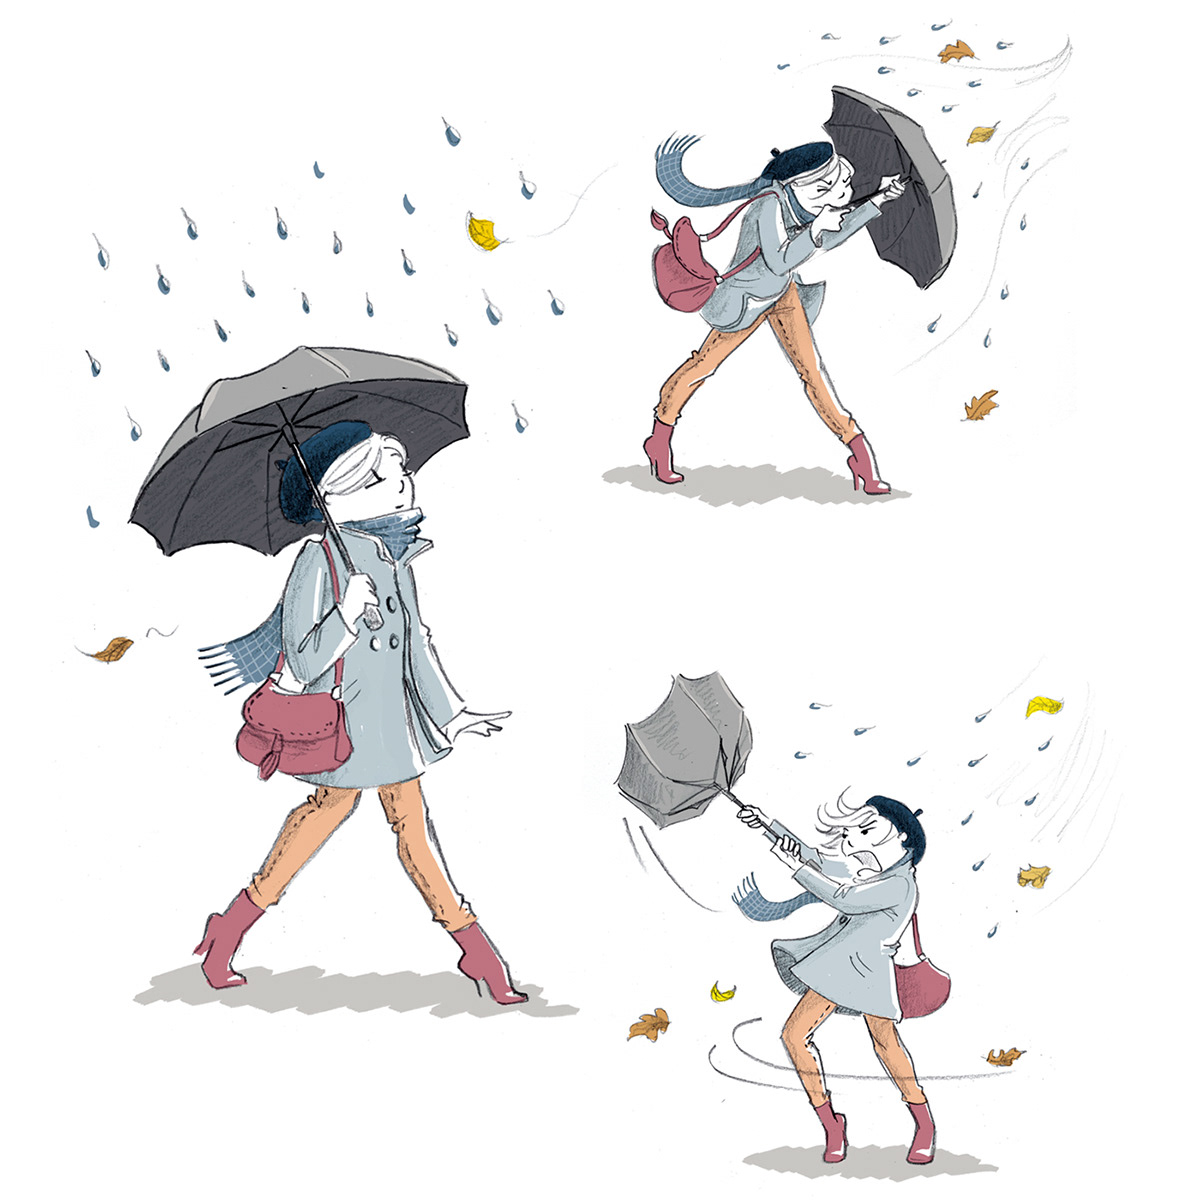 Cartoon, drawing and illustration. Young woman under an umbrella on a rainy day.